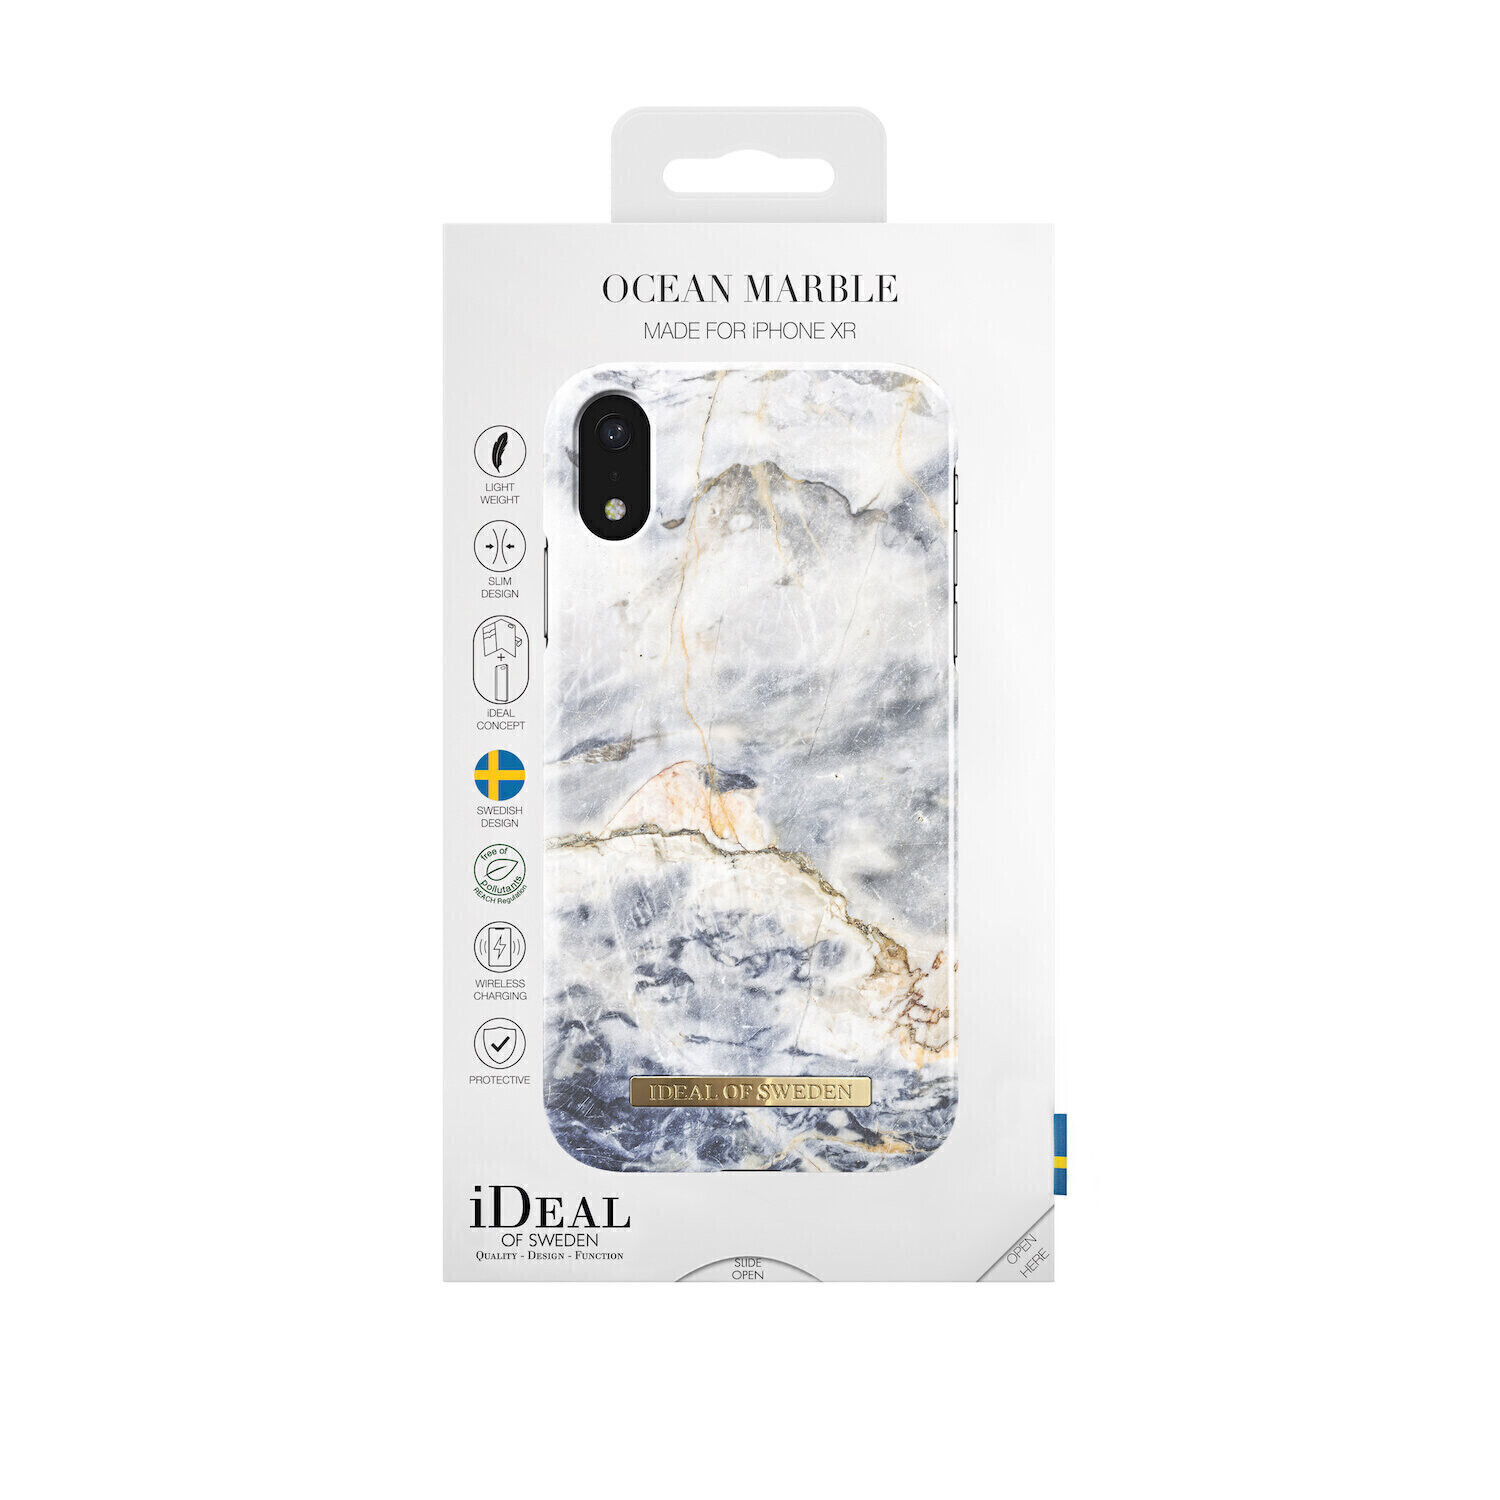 iDeal Of Sweden iPhone XR Fashion Case A/W 16-17, Ocean Marble